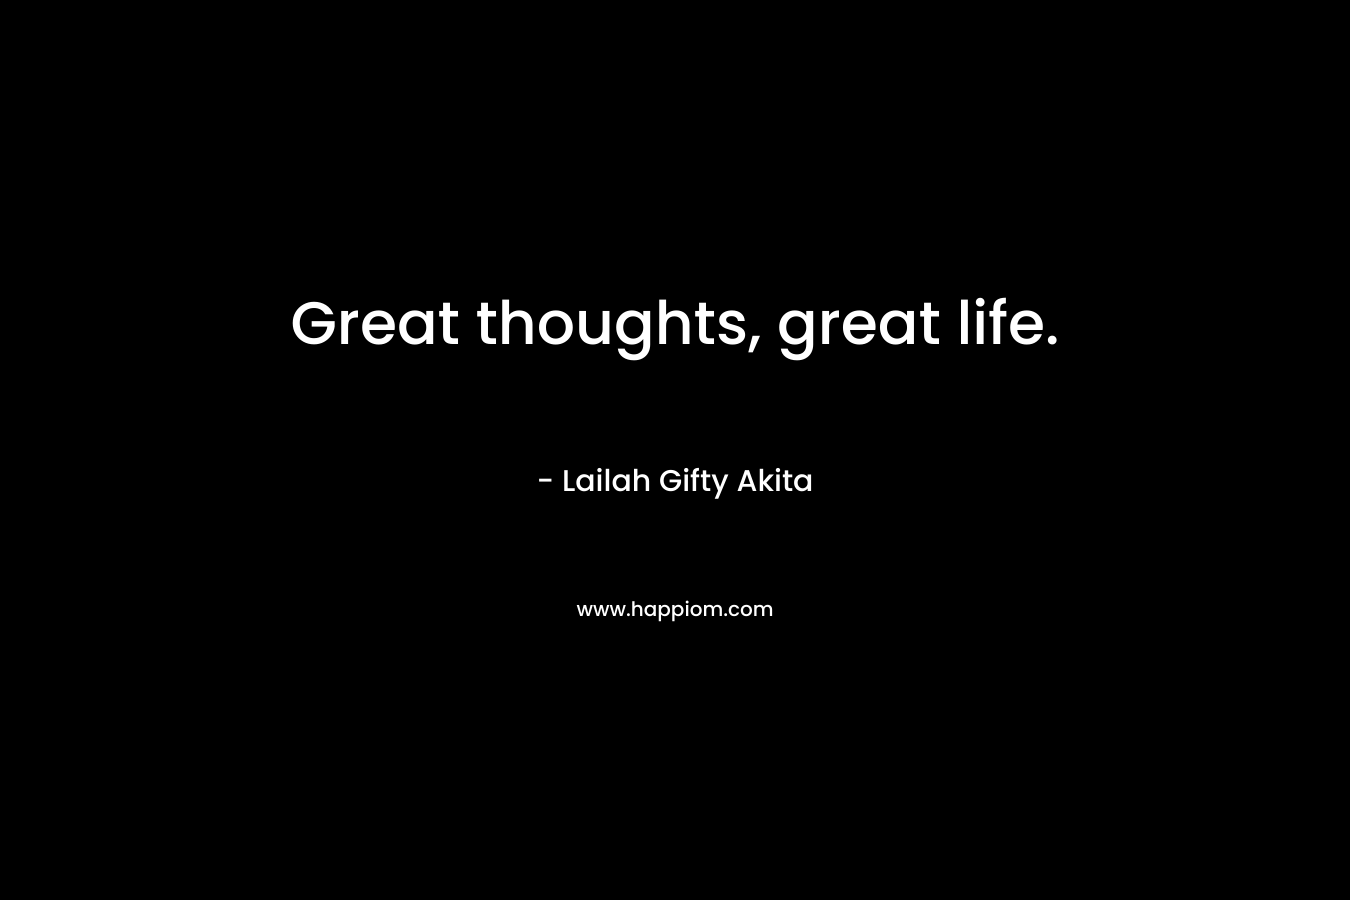 Great thoughts, great life.